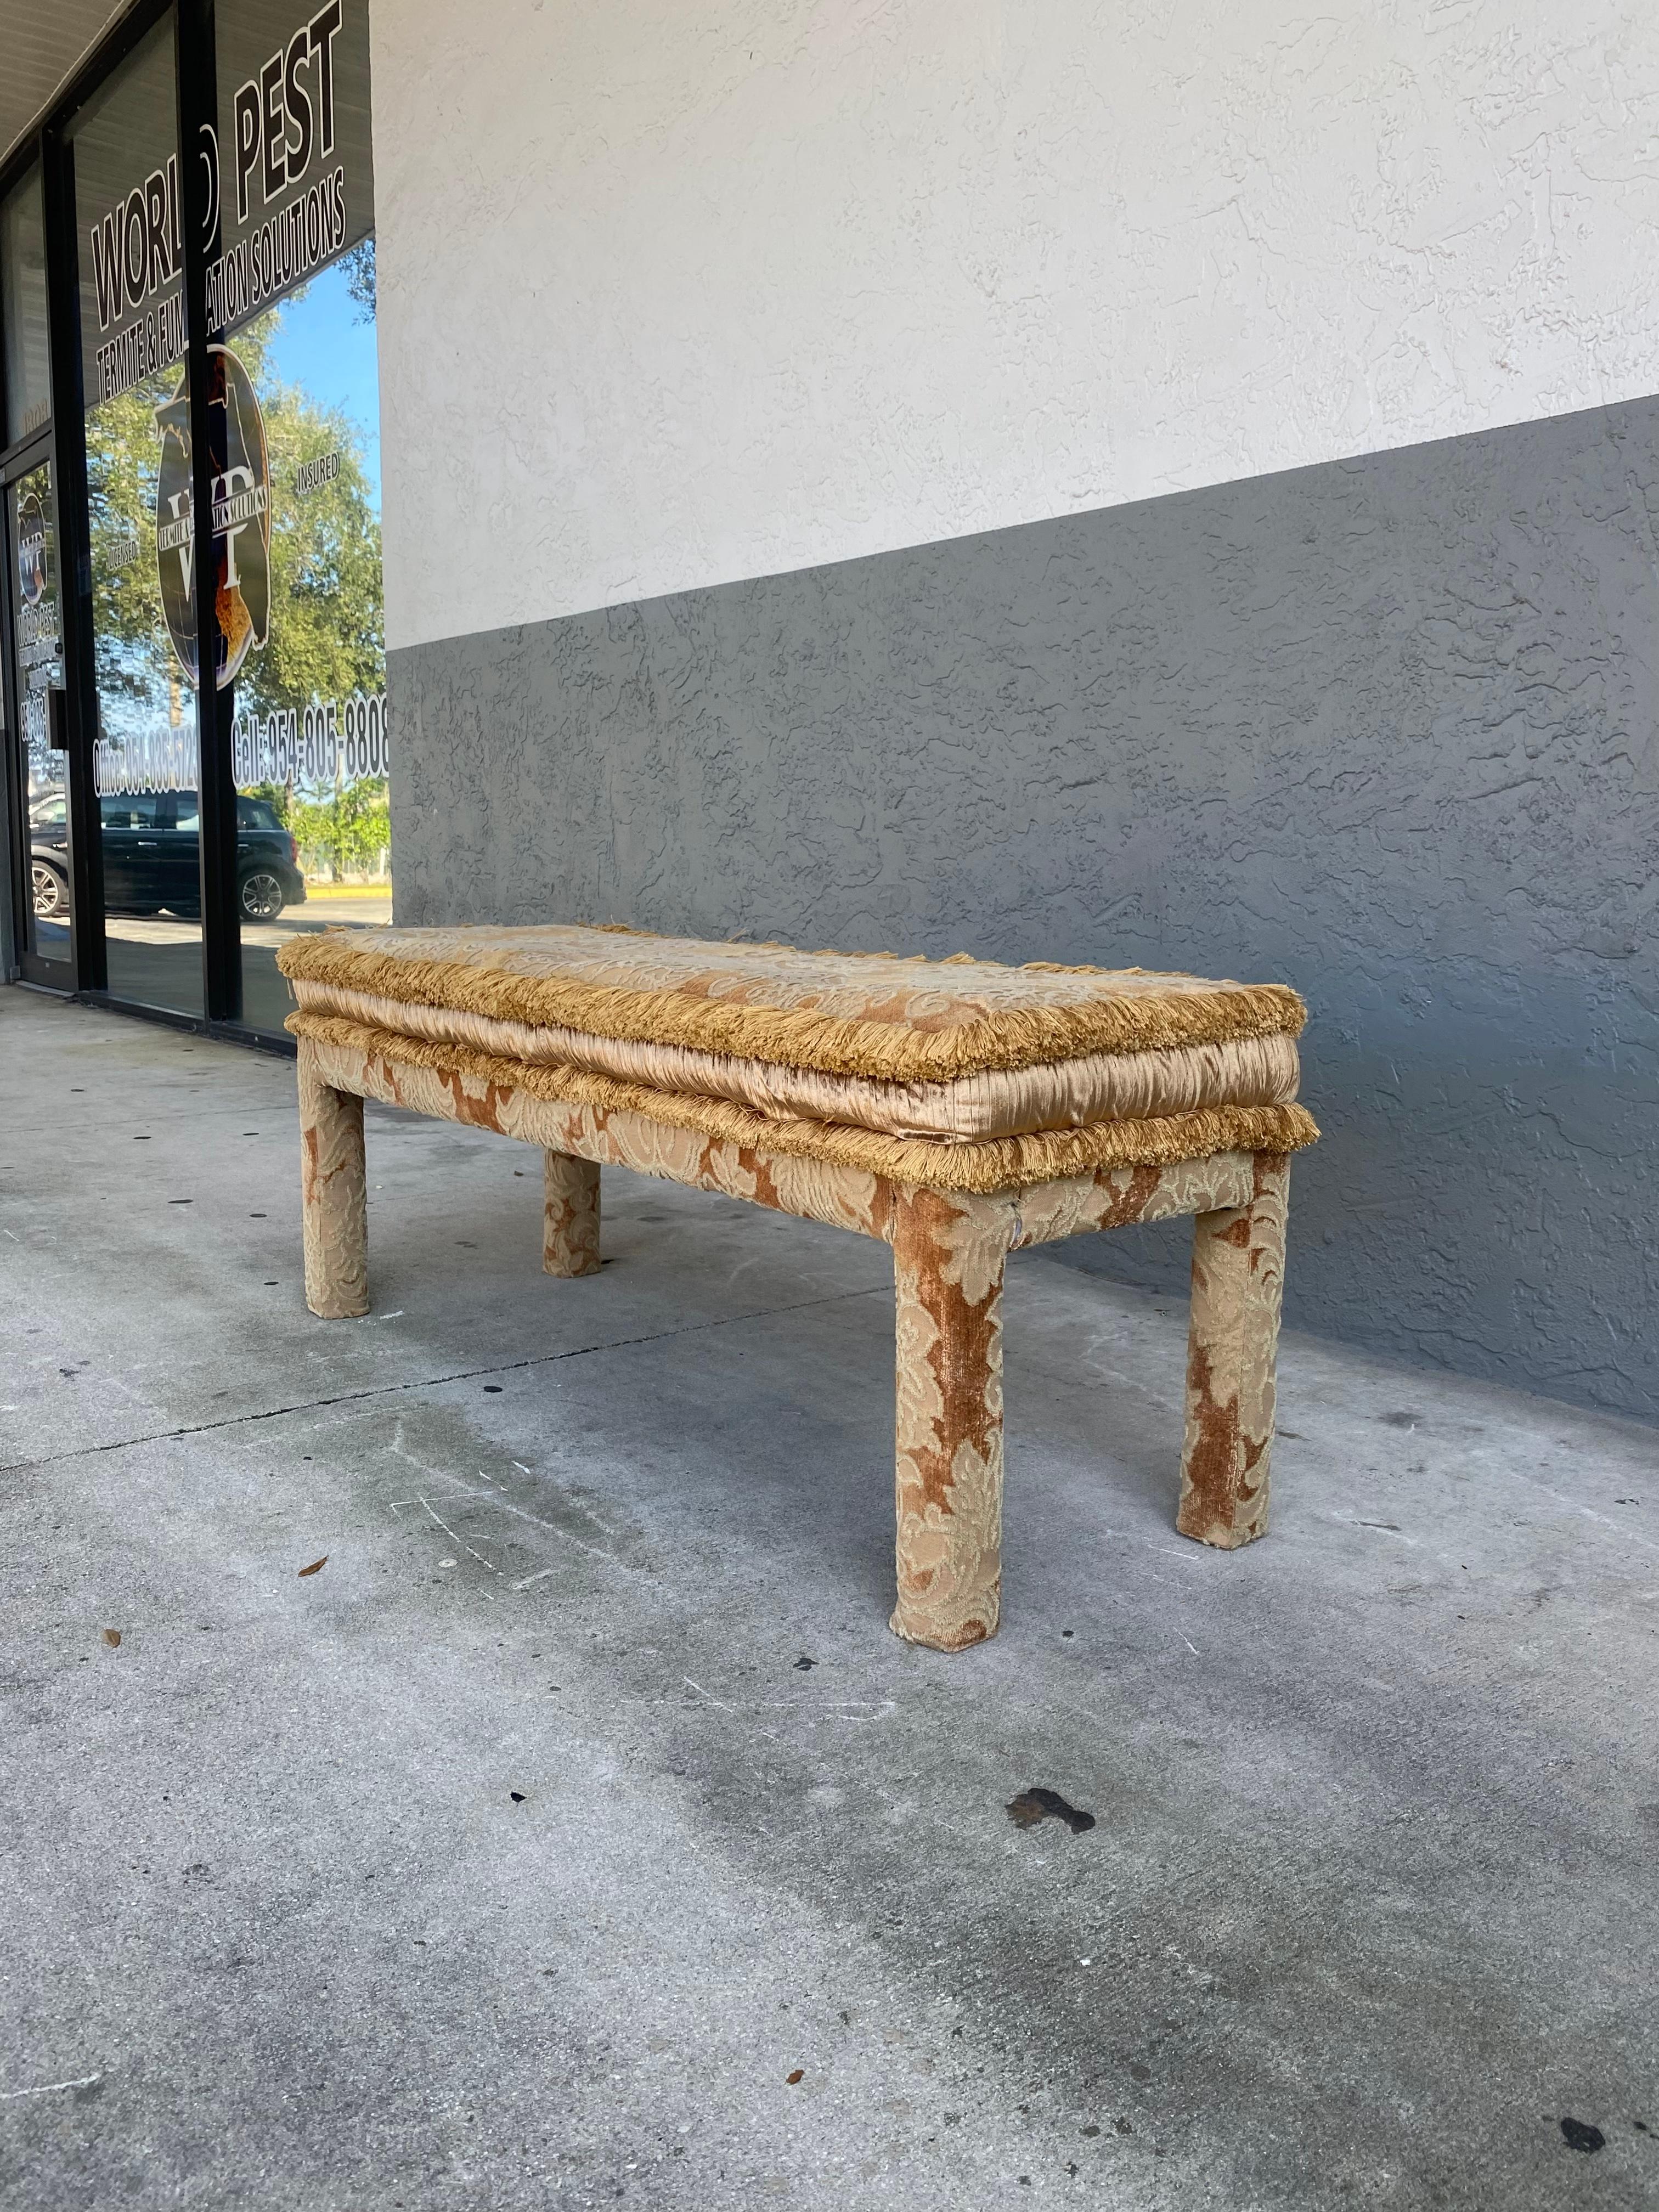 On offer on this occasion is one of the most stunning, bench you could hope to find. This is an ultra-rare opportunity to acquire what is, unequivocally, the best of the best, it being a most spectacular and beautifully-presented bench. Outstanding